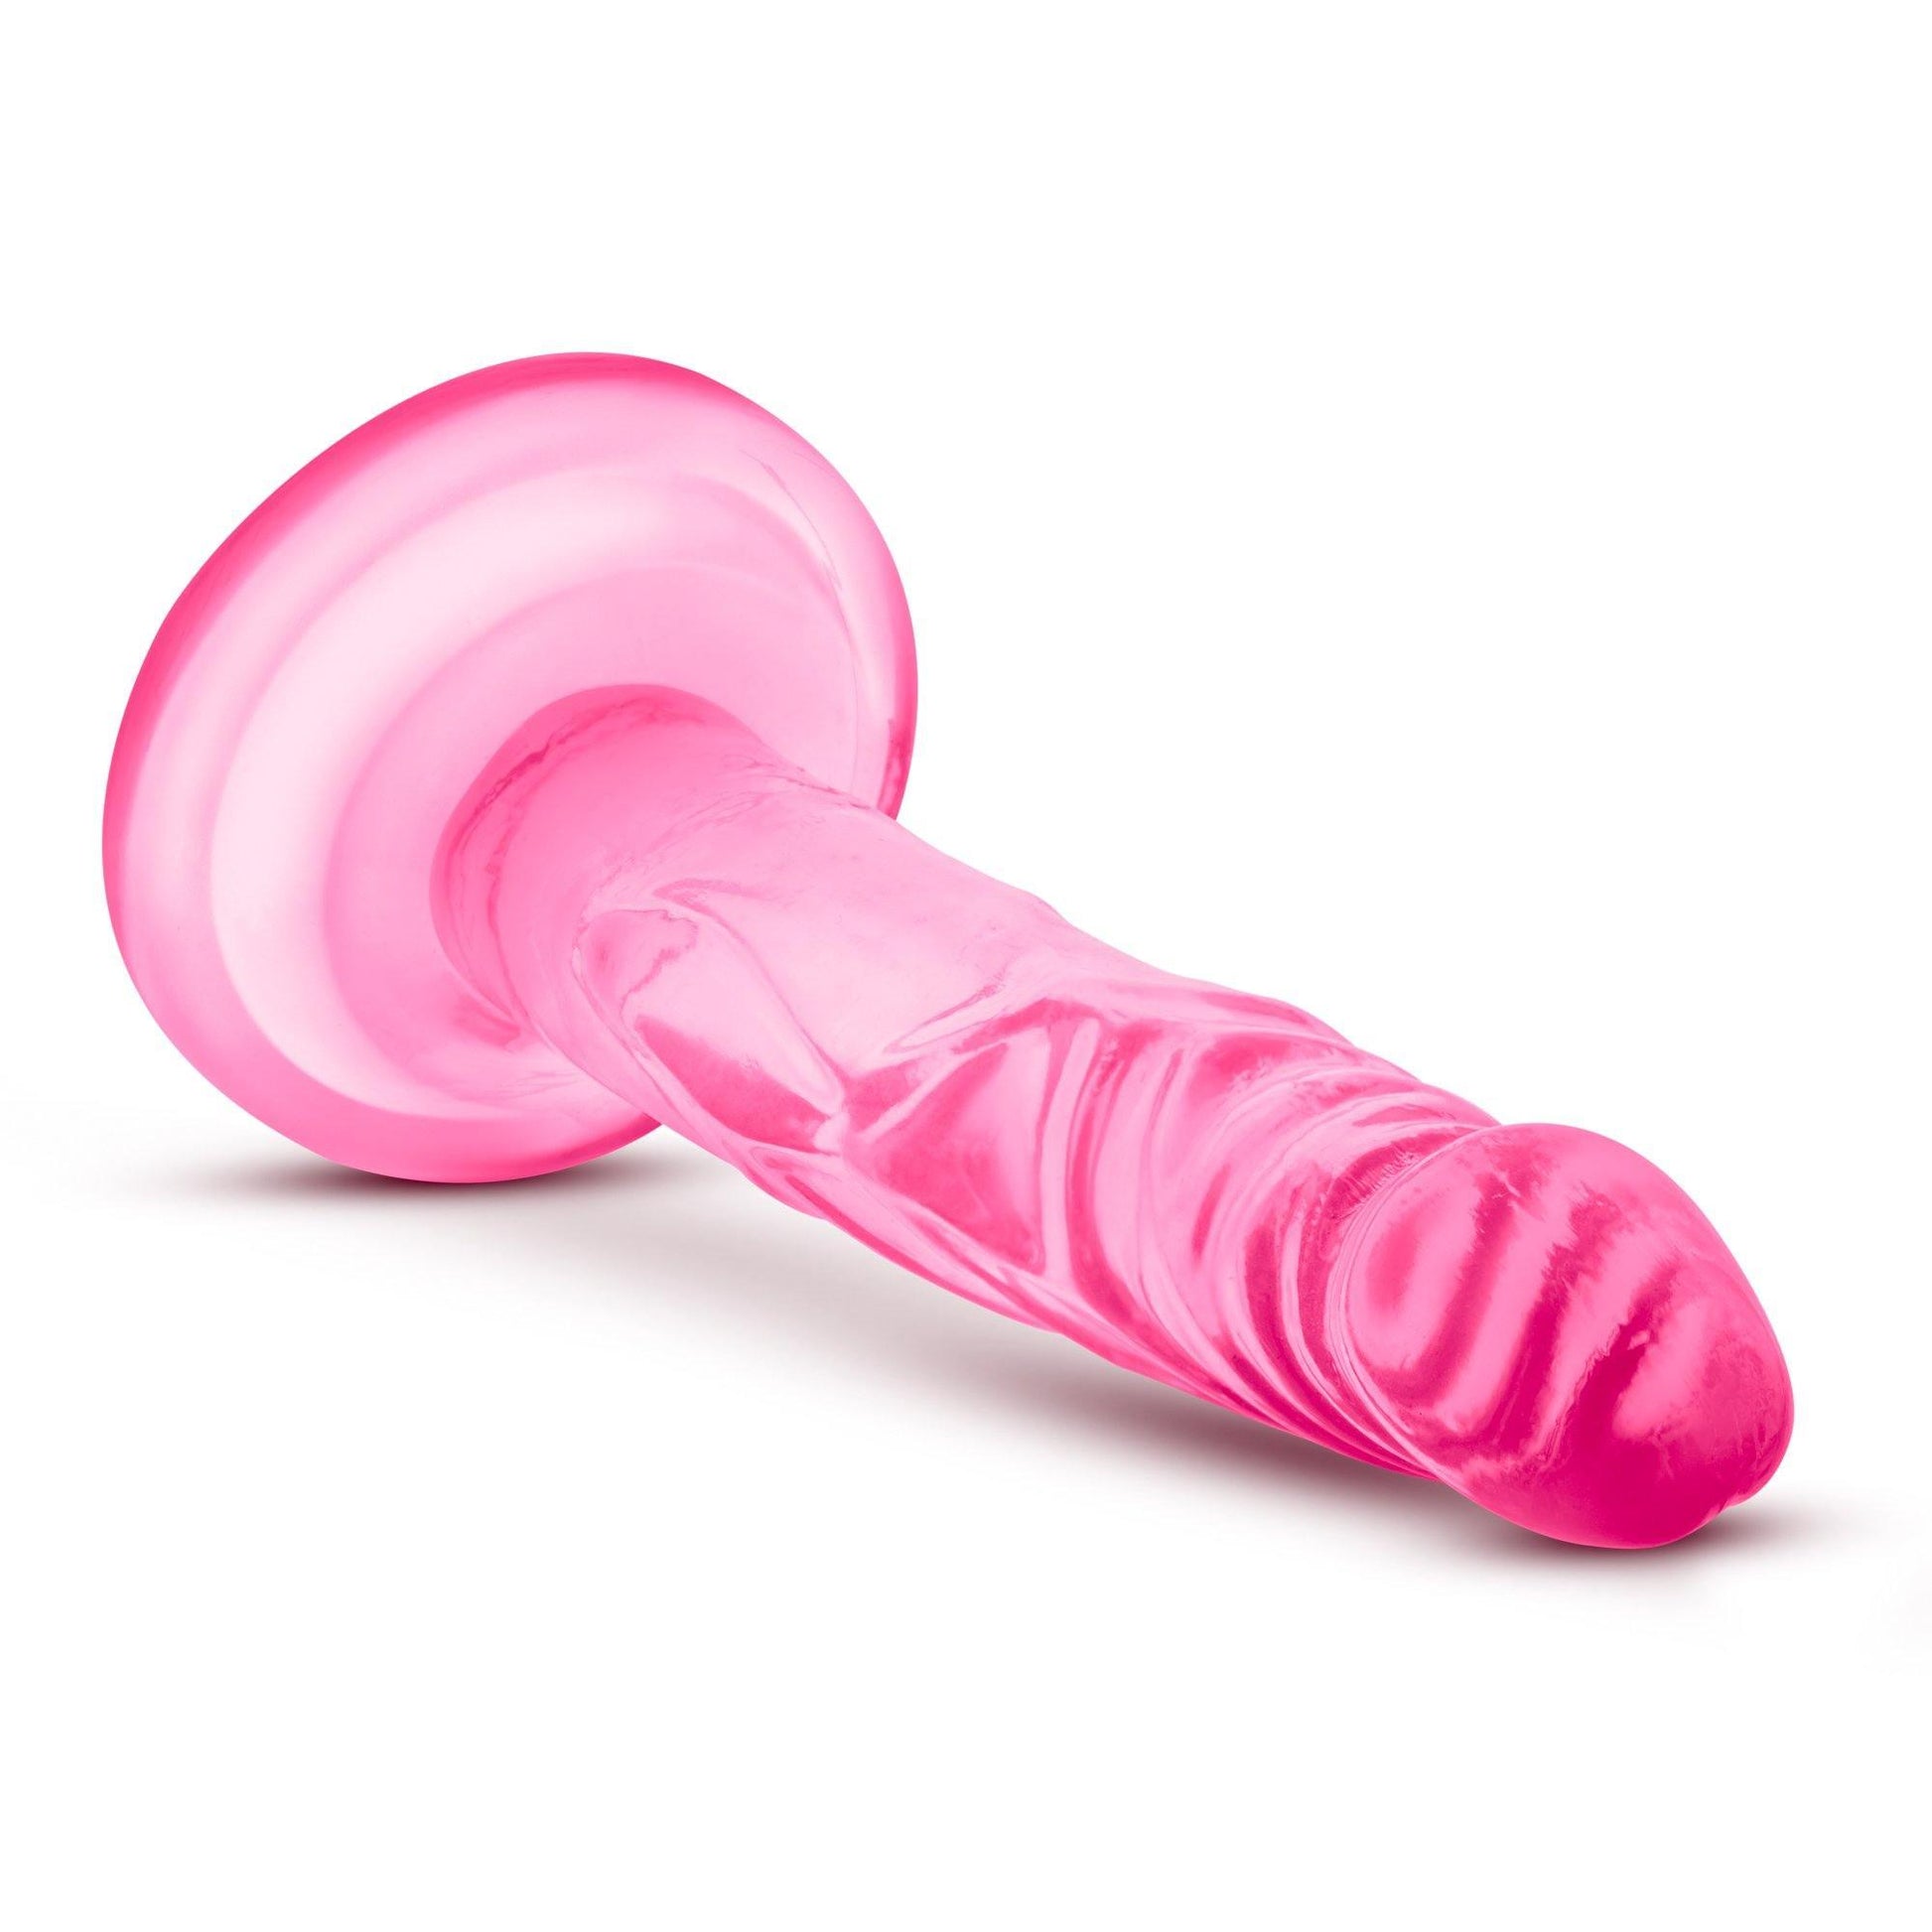 Naturally Yours - 5 Inch Mini Cock - Pink - My Sex Toy Hub